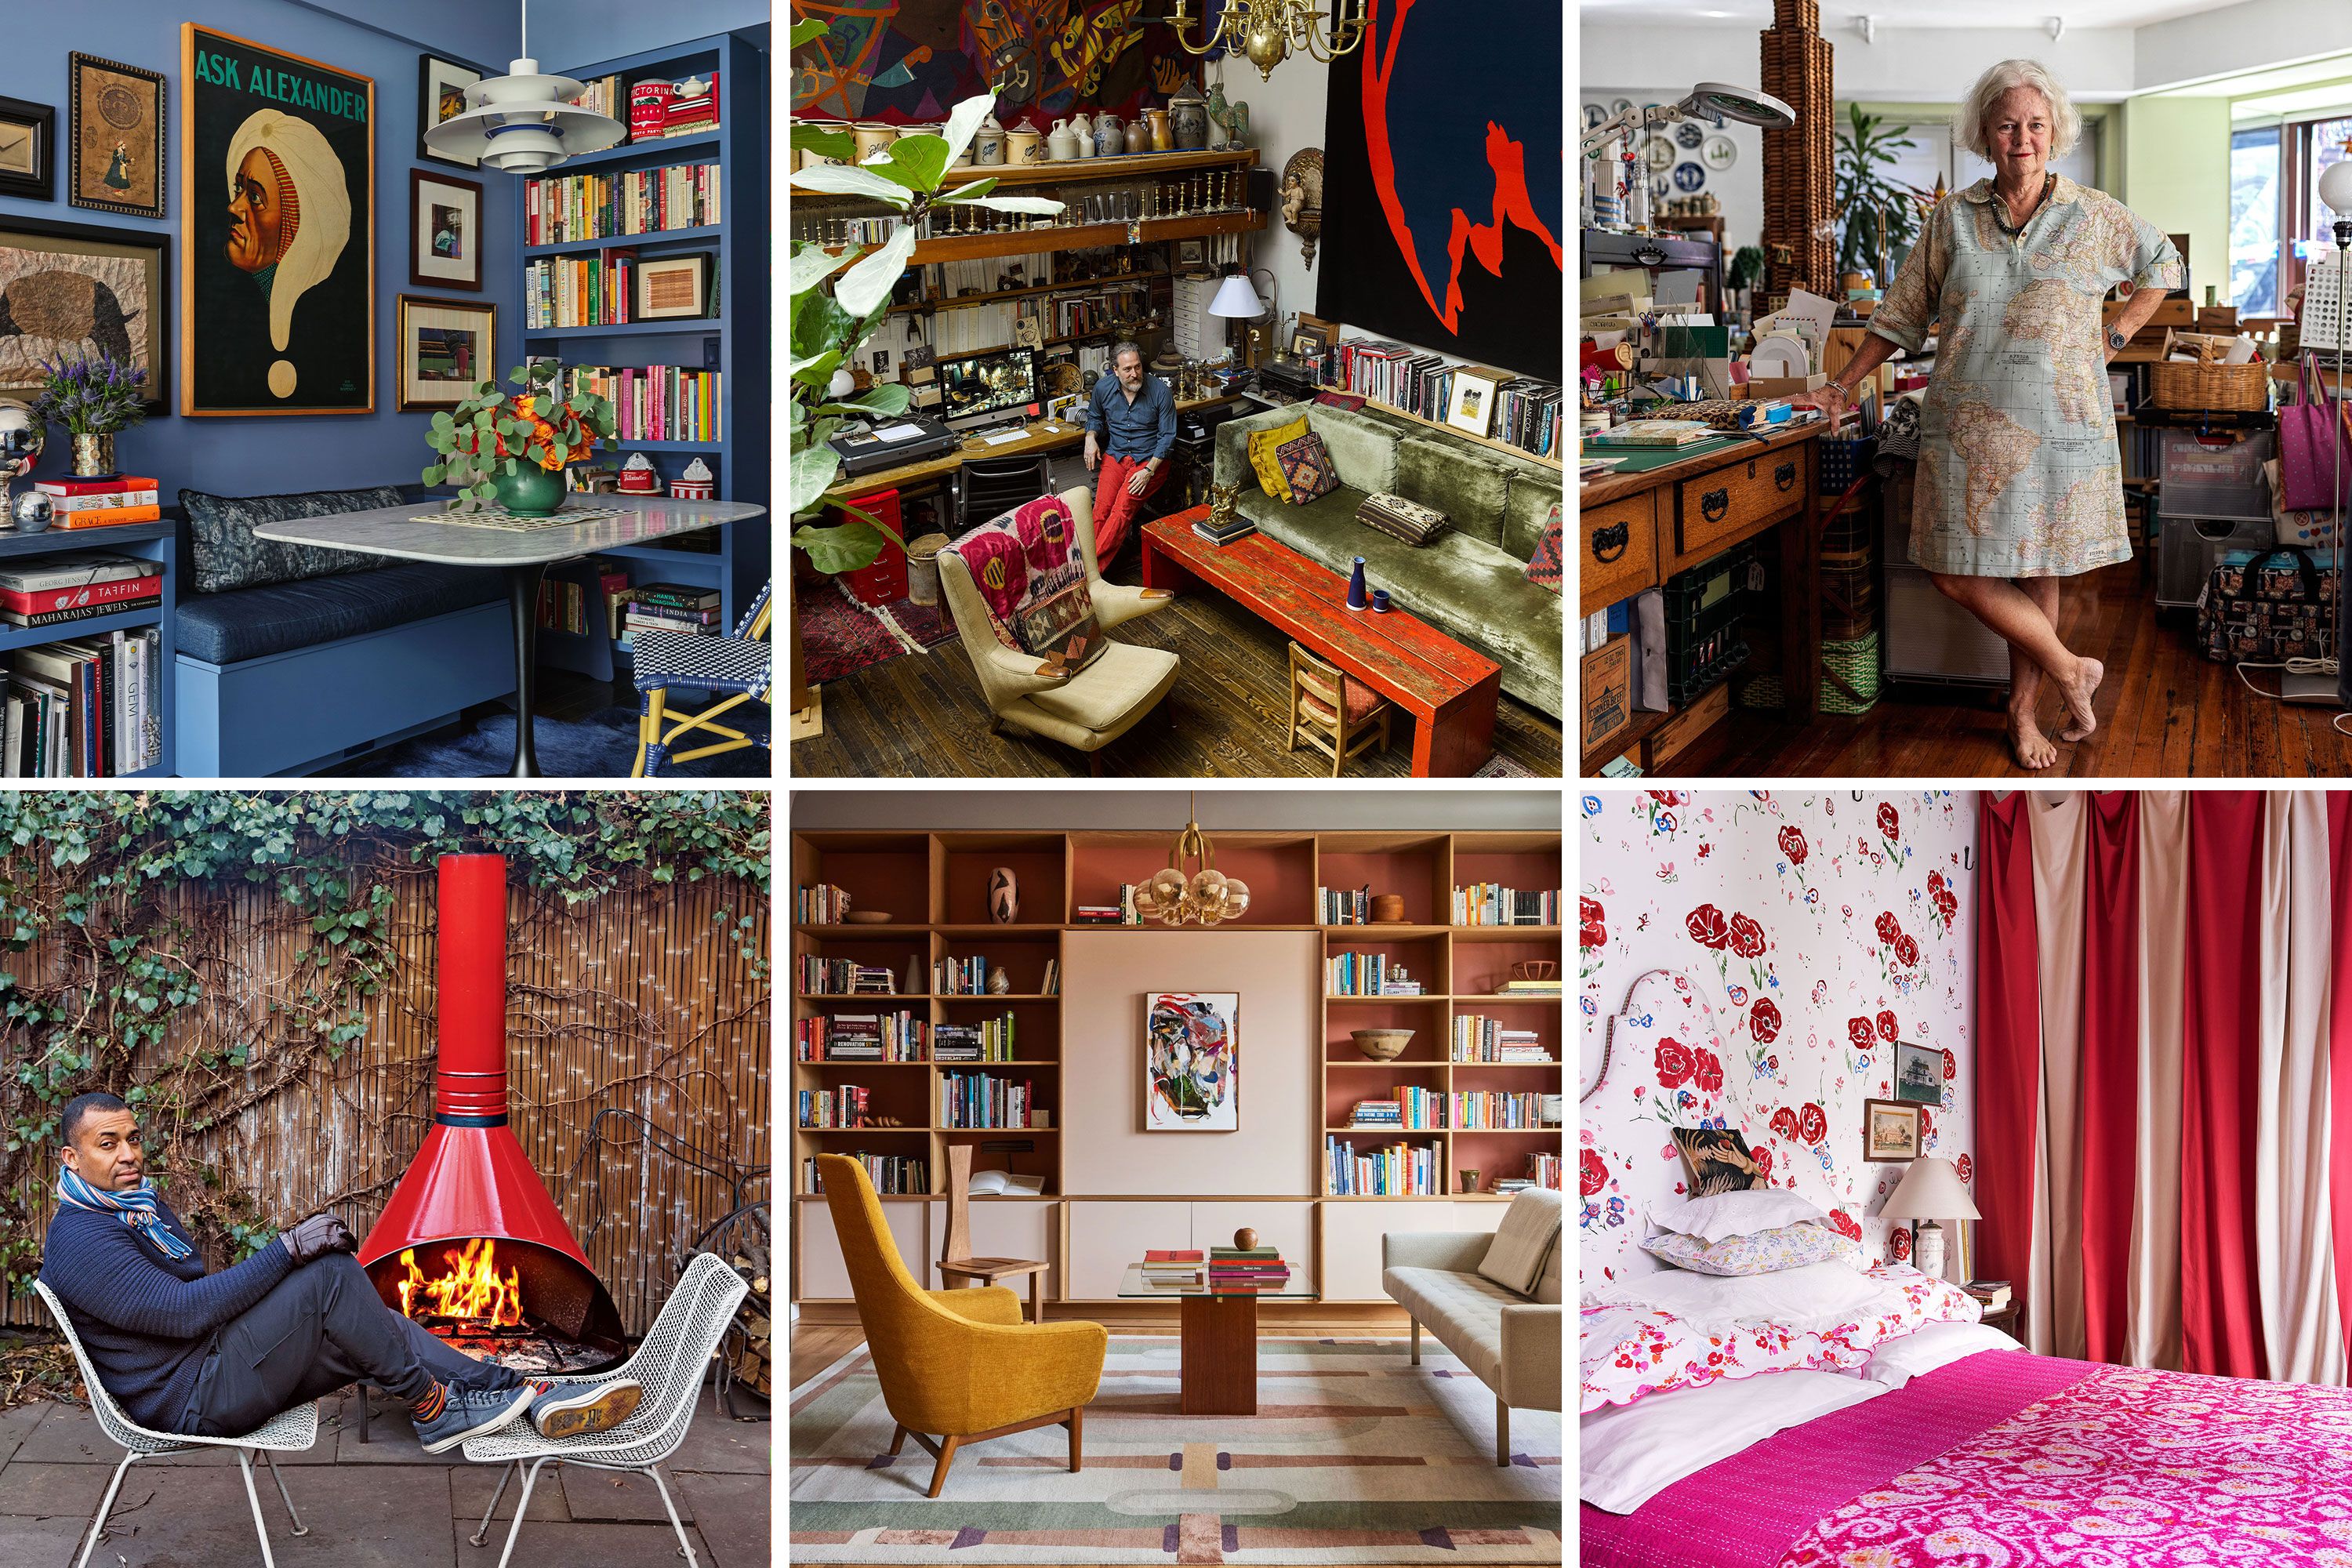 The 25 Rooms That Influence the Way We Design - The New York Times